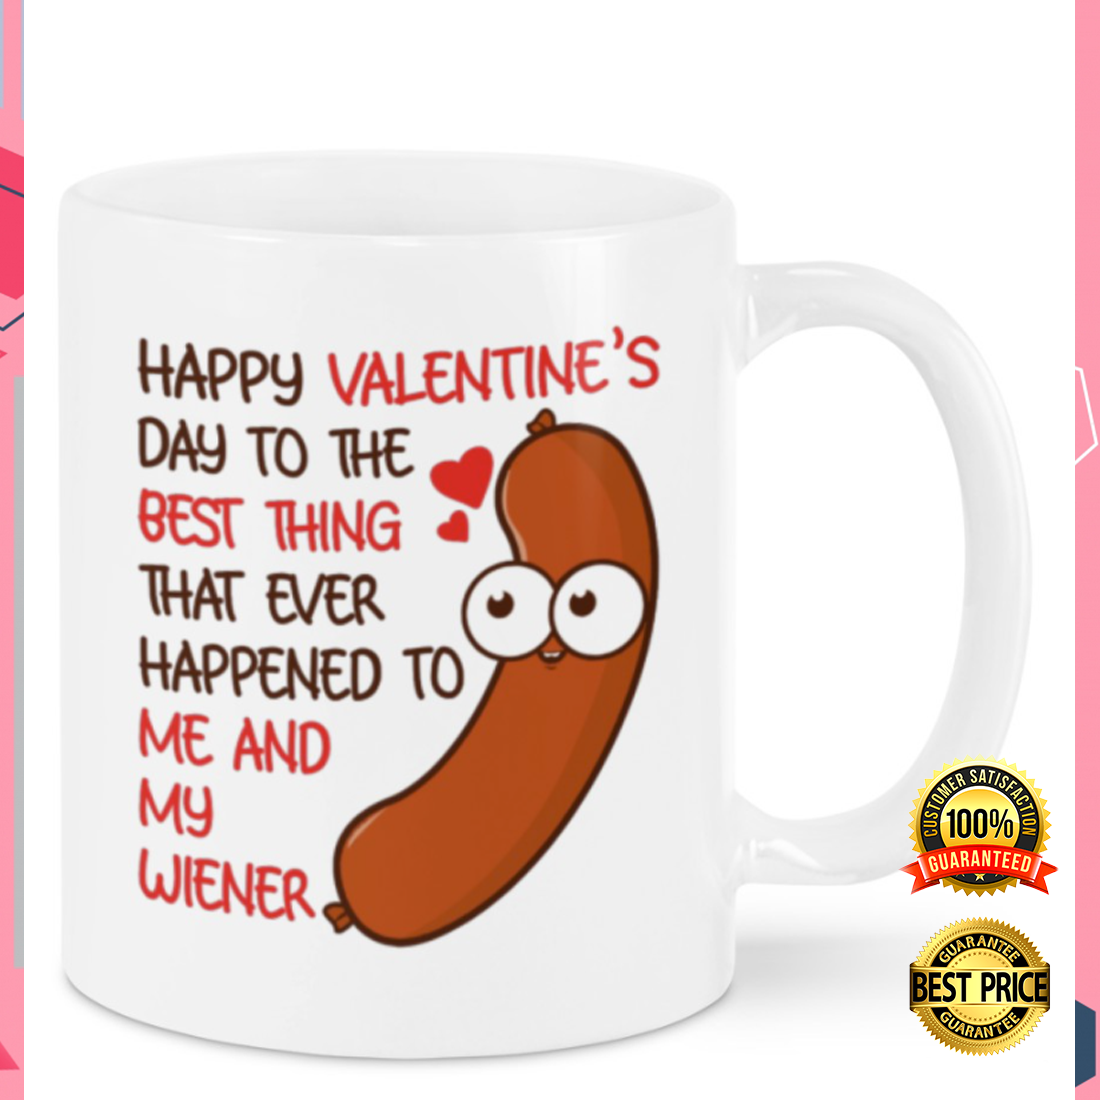 Happy Valentine’s Day To The Best Thing That Ever Happened To Me And My Wiener Mug